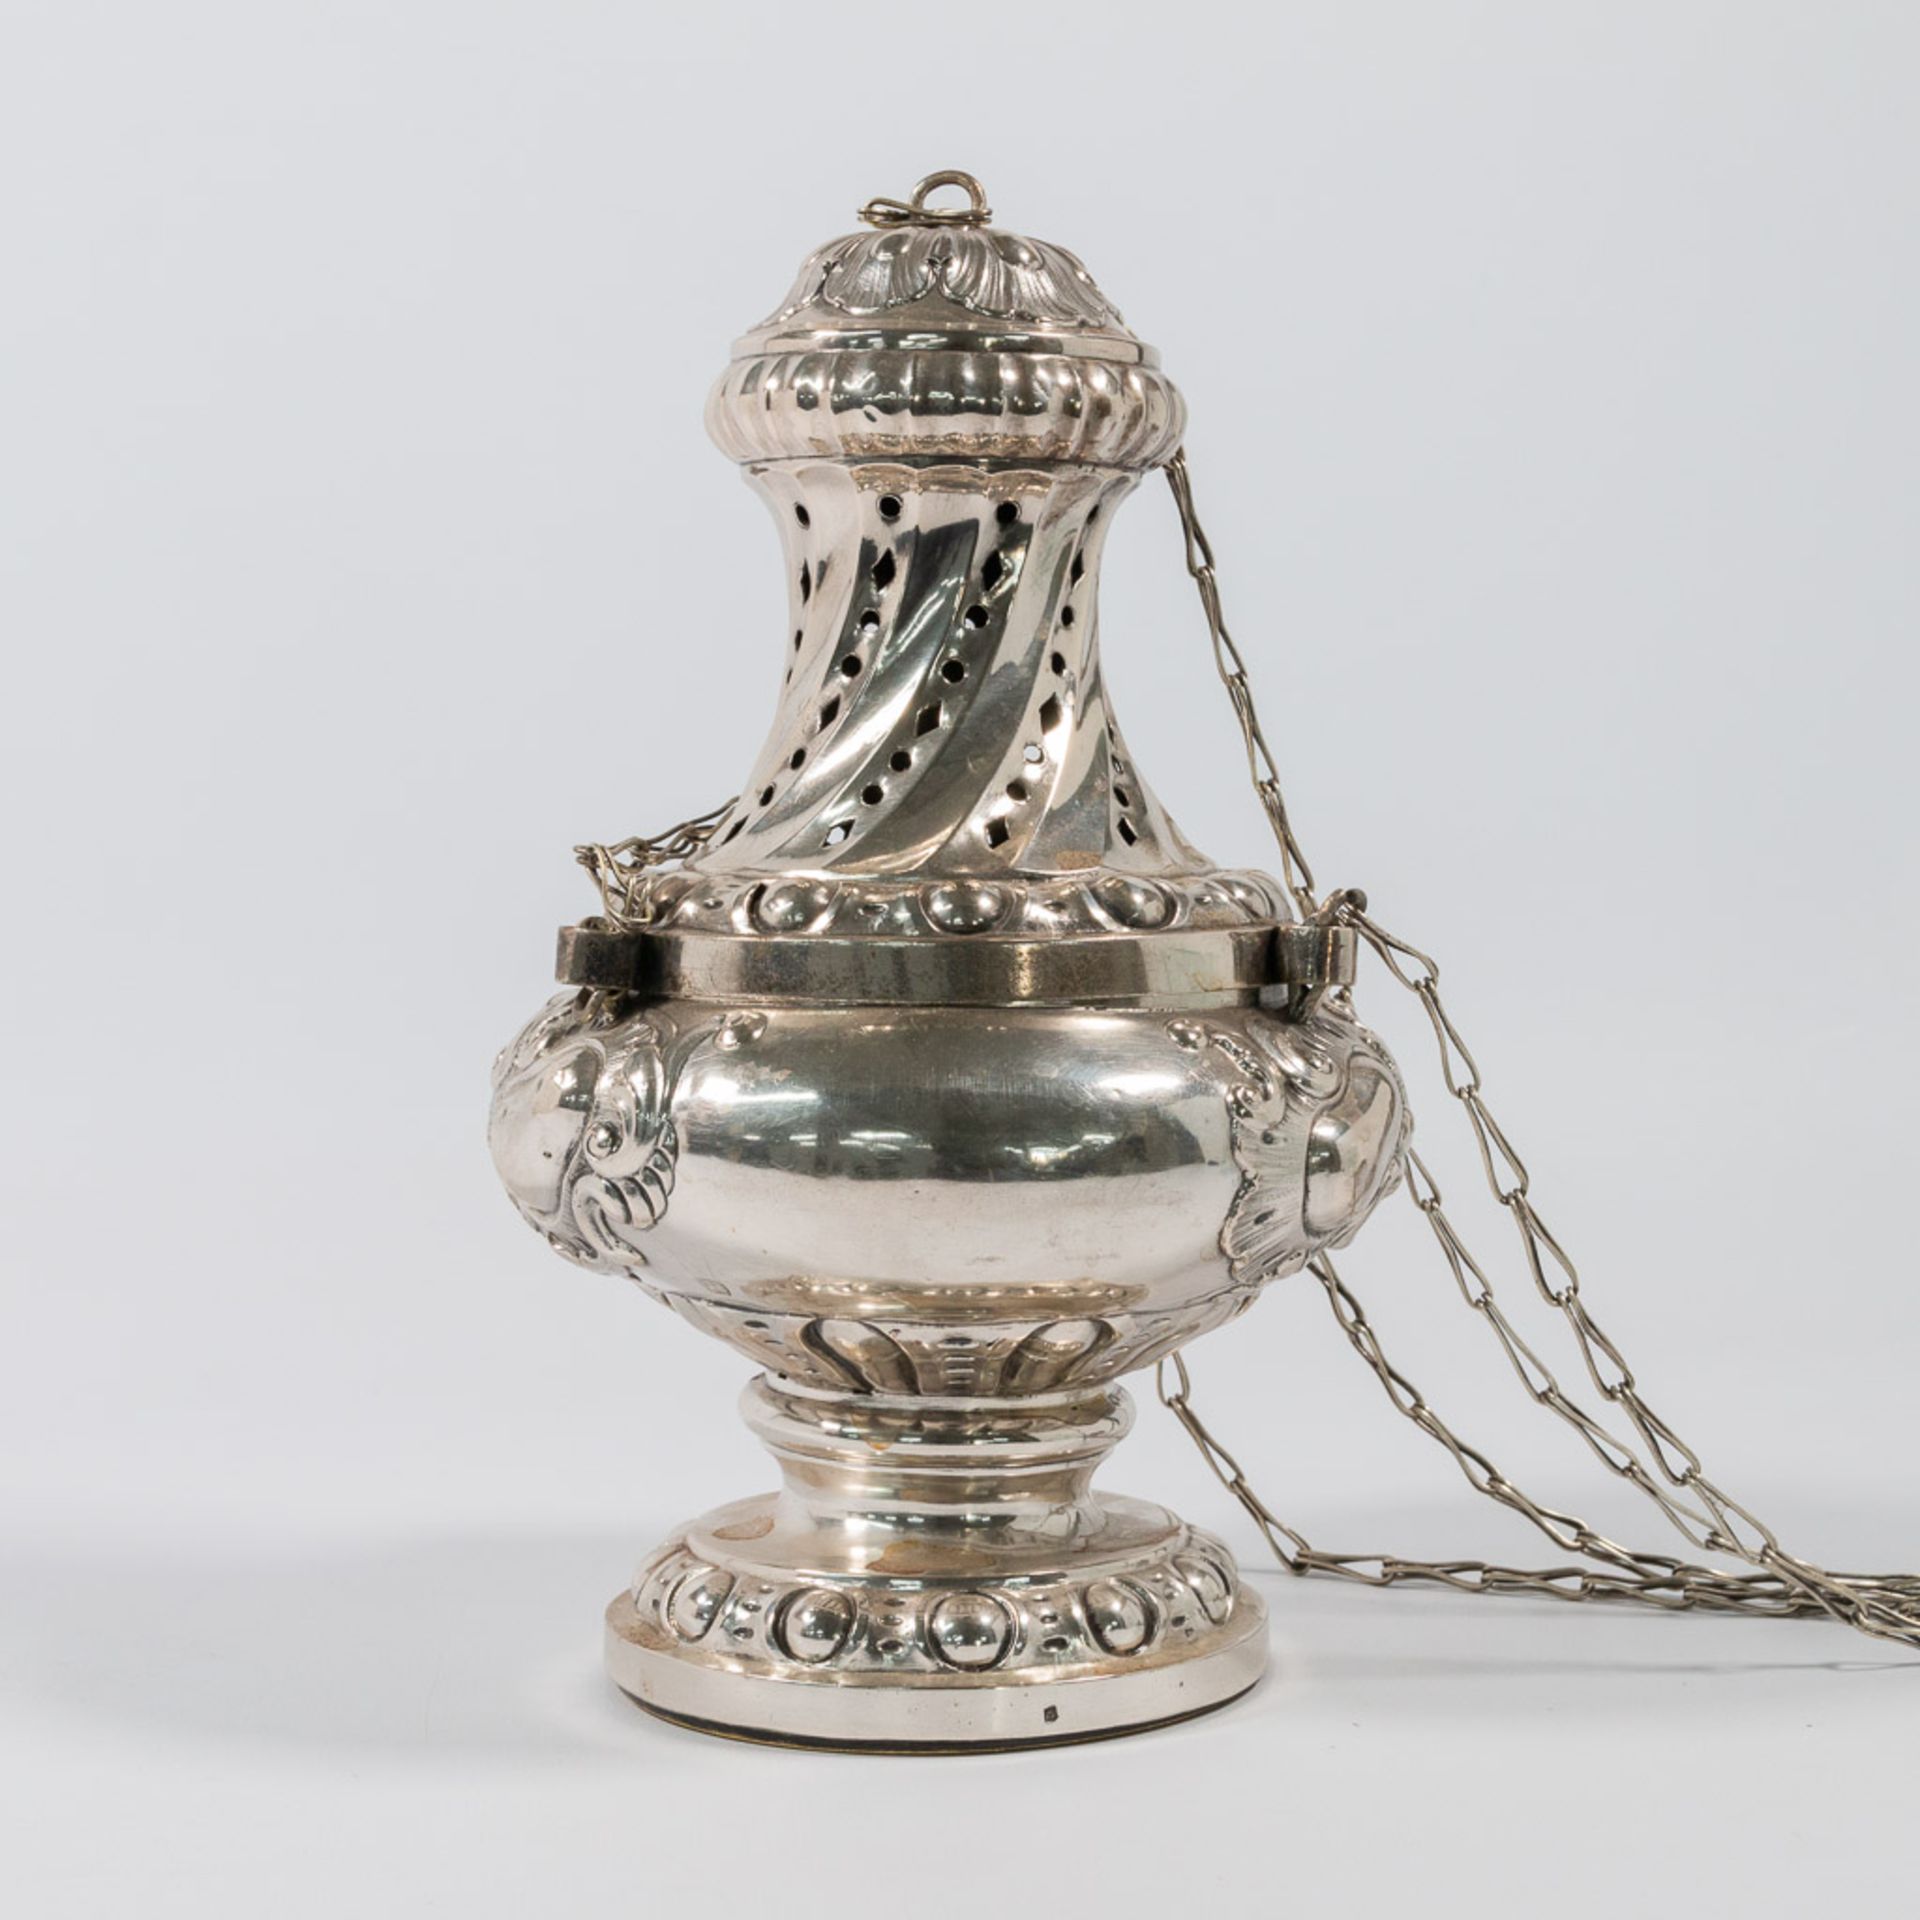 A silver Insence burner and Insence jar. - Image 26 of 39